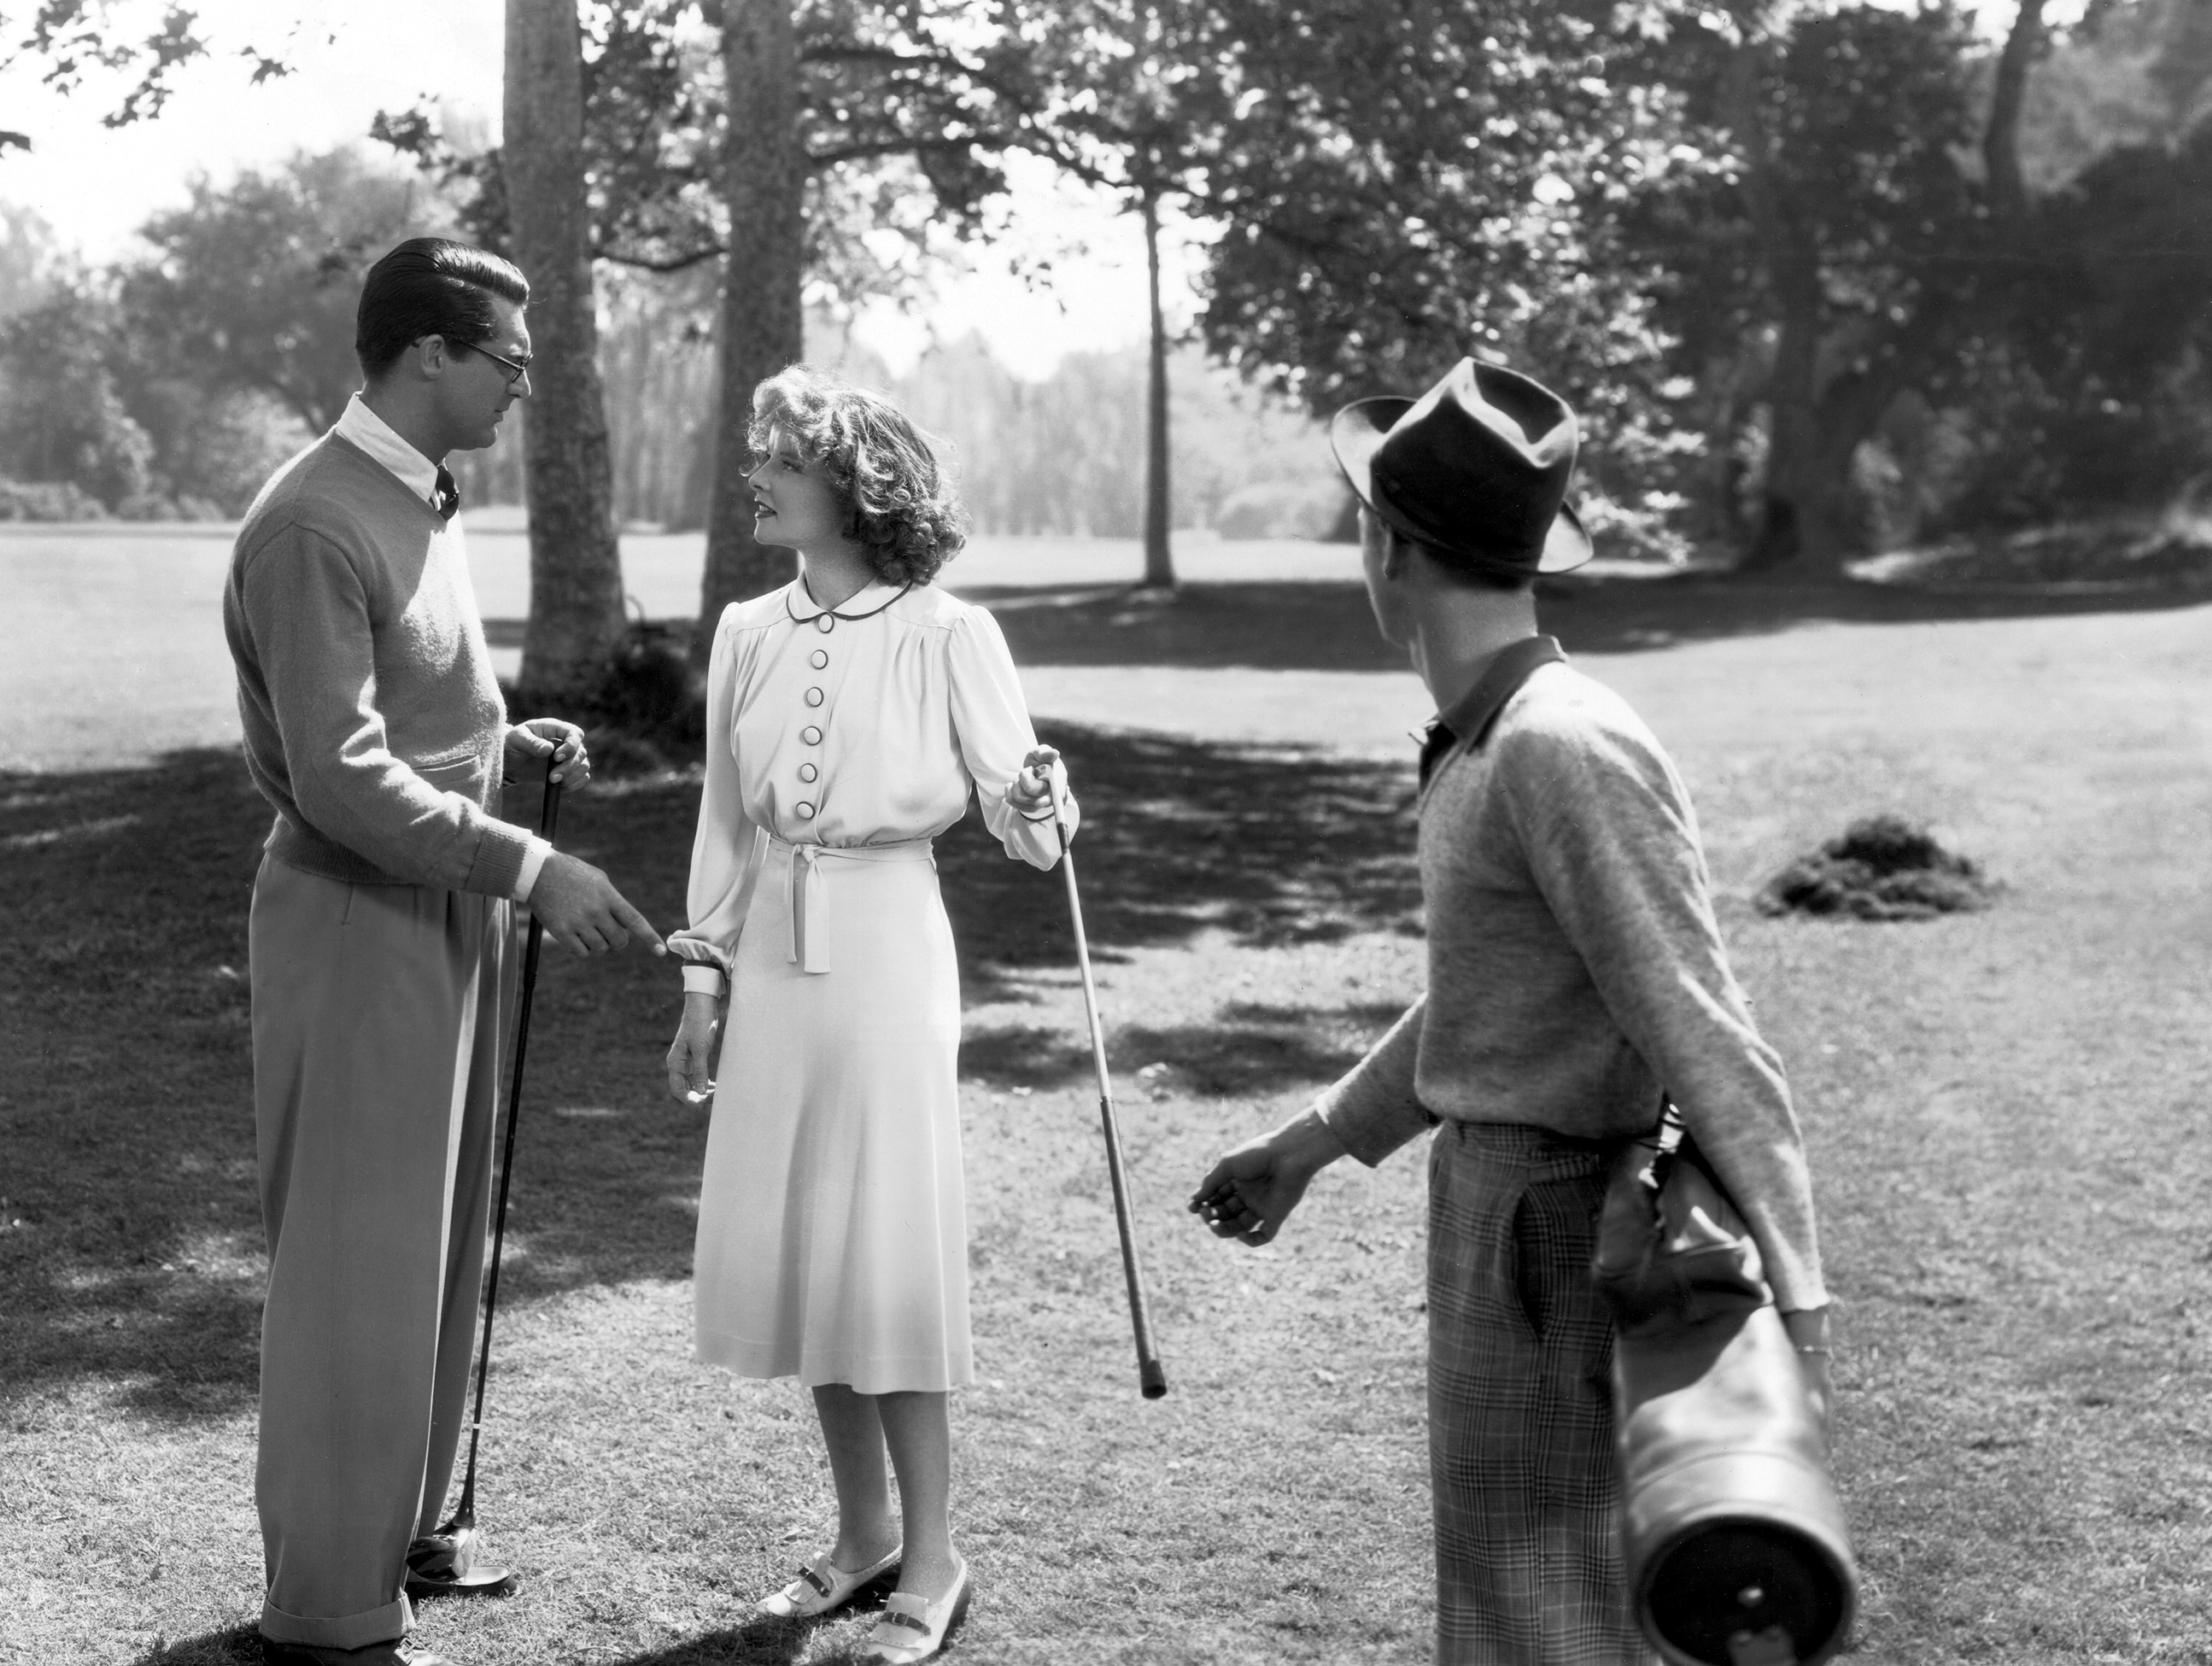 Cary Grant and Katharine Hepburn talking on a golf course.